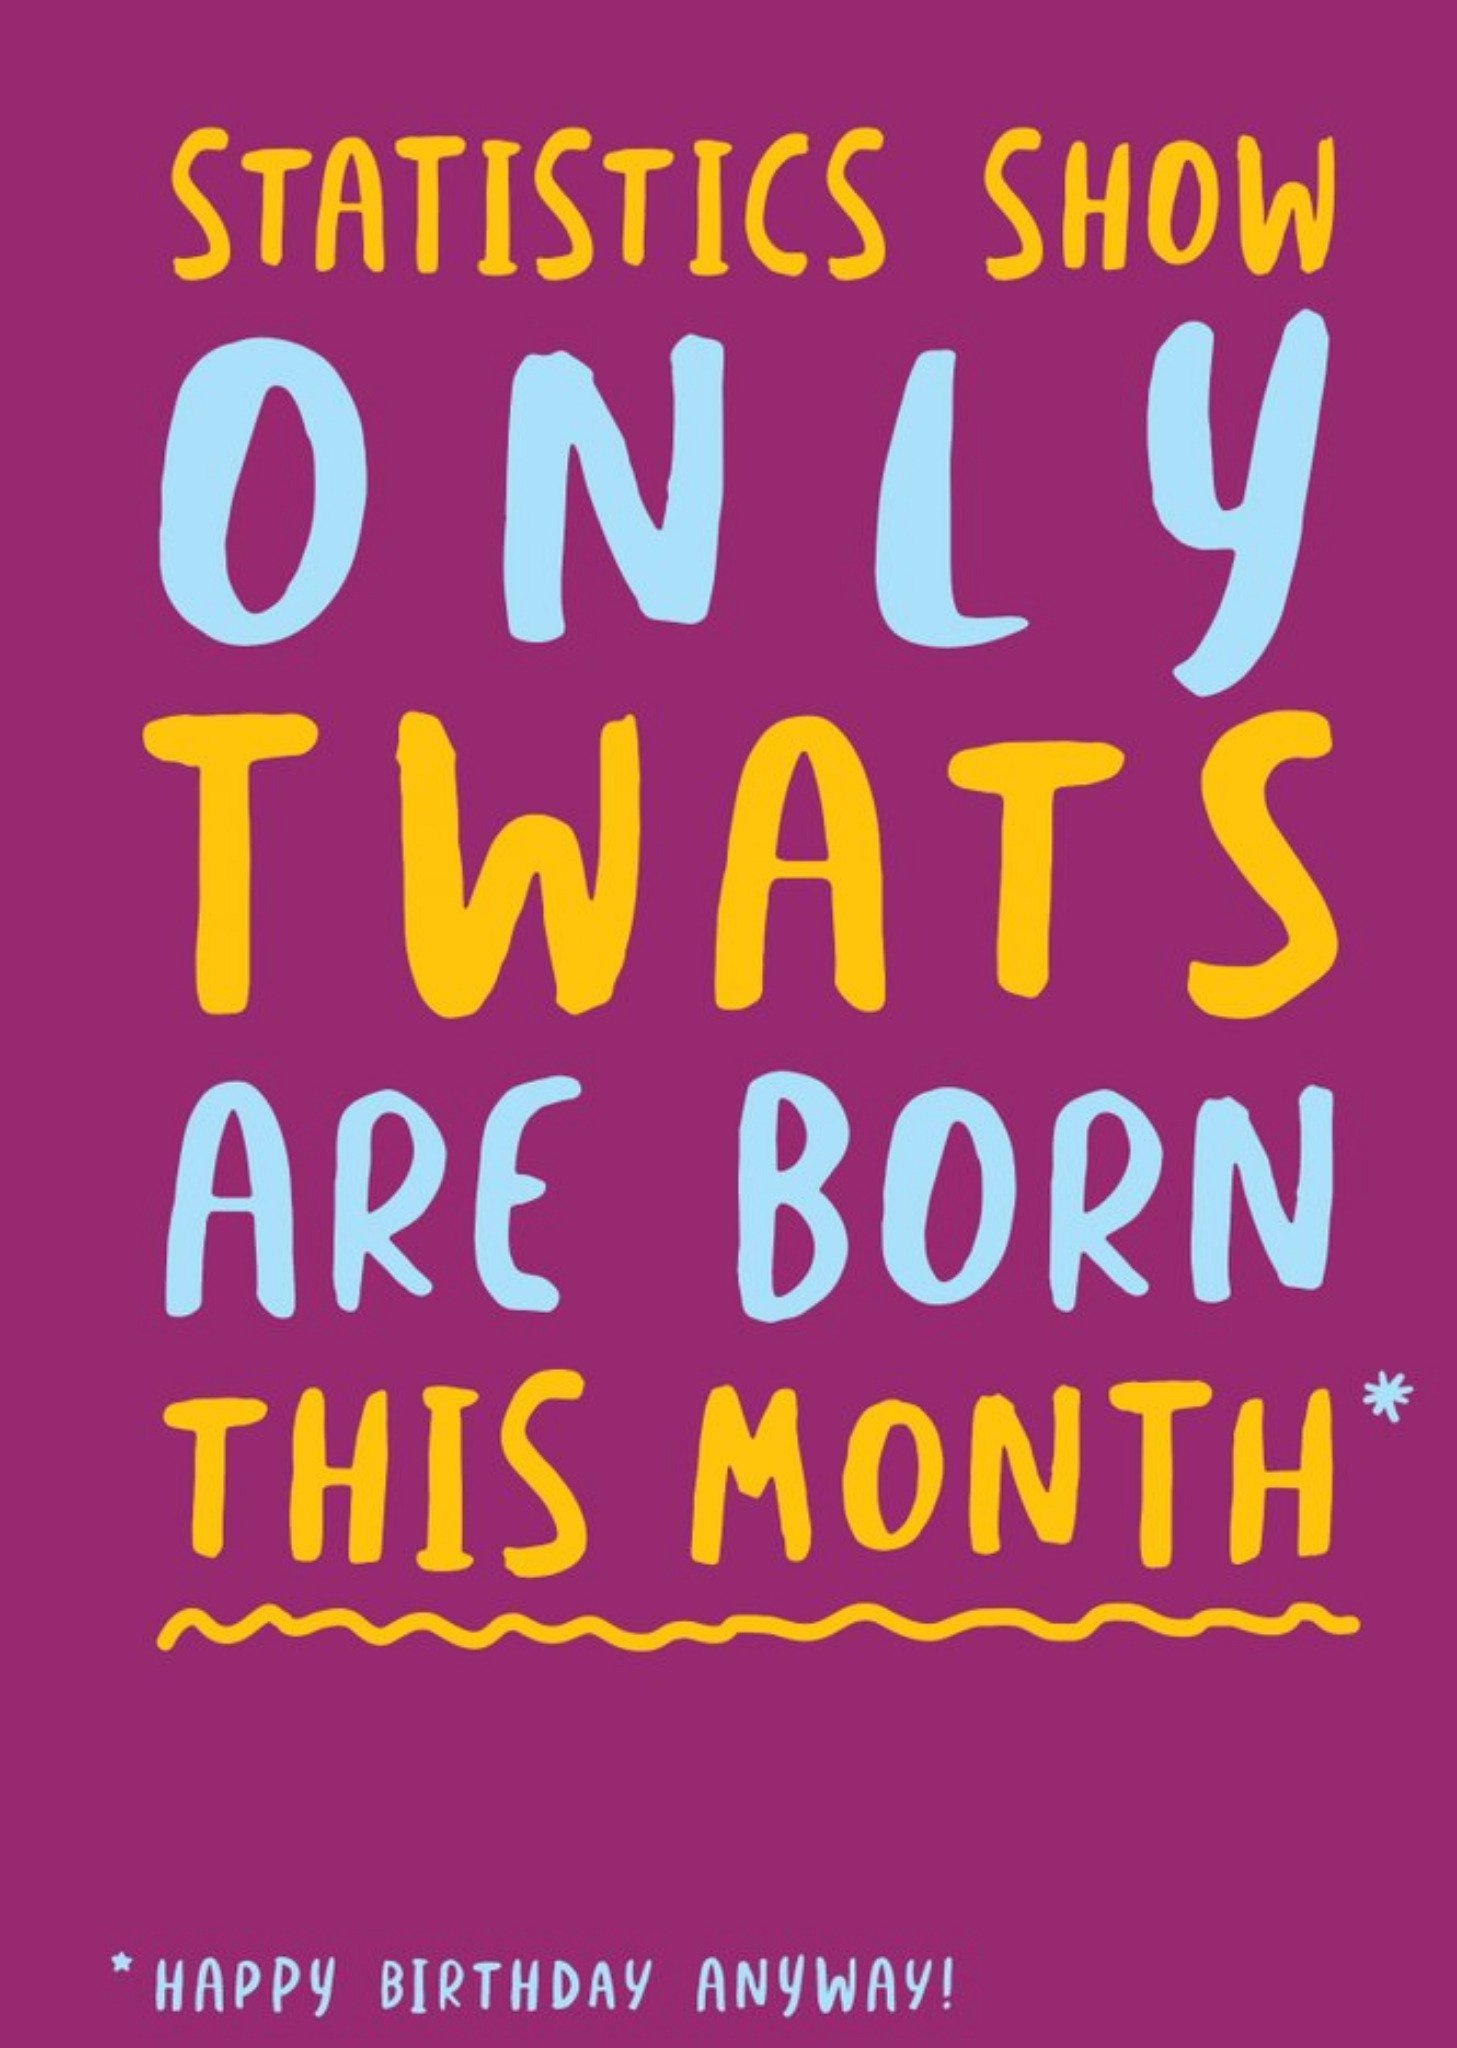 Moonpig Only Twats Are Born This Month Birthday Card, Large